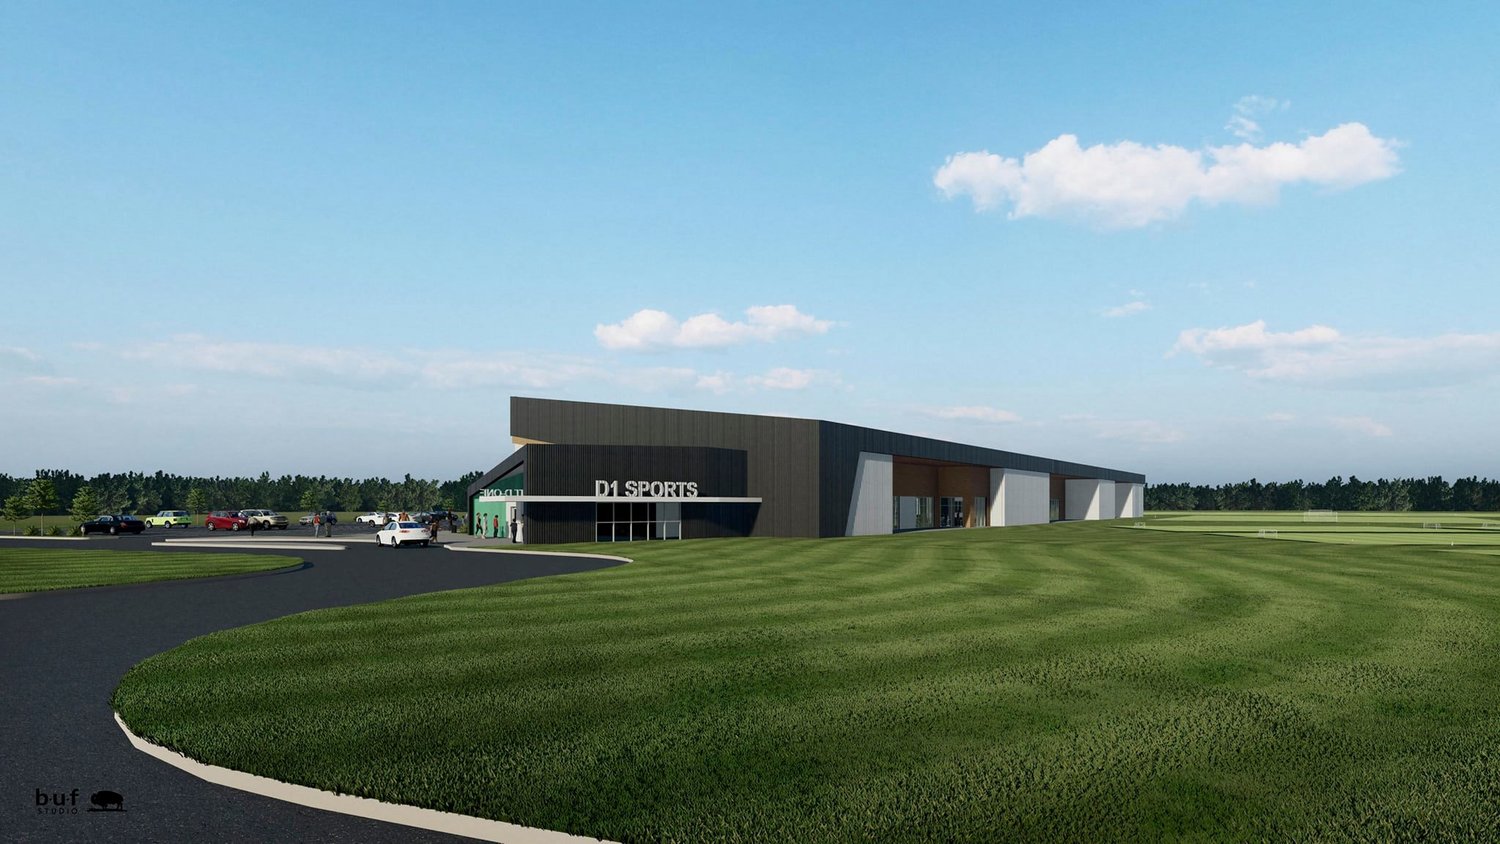 D1 Sports' plans include a 37,000-square-foot building for indoor competitions.